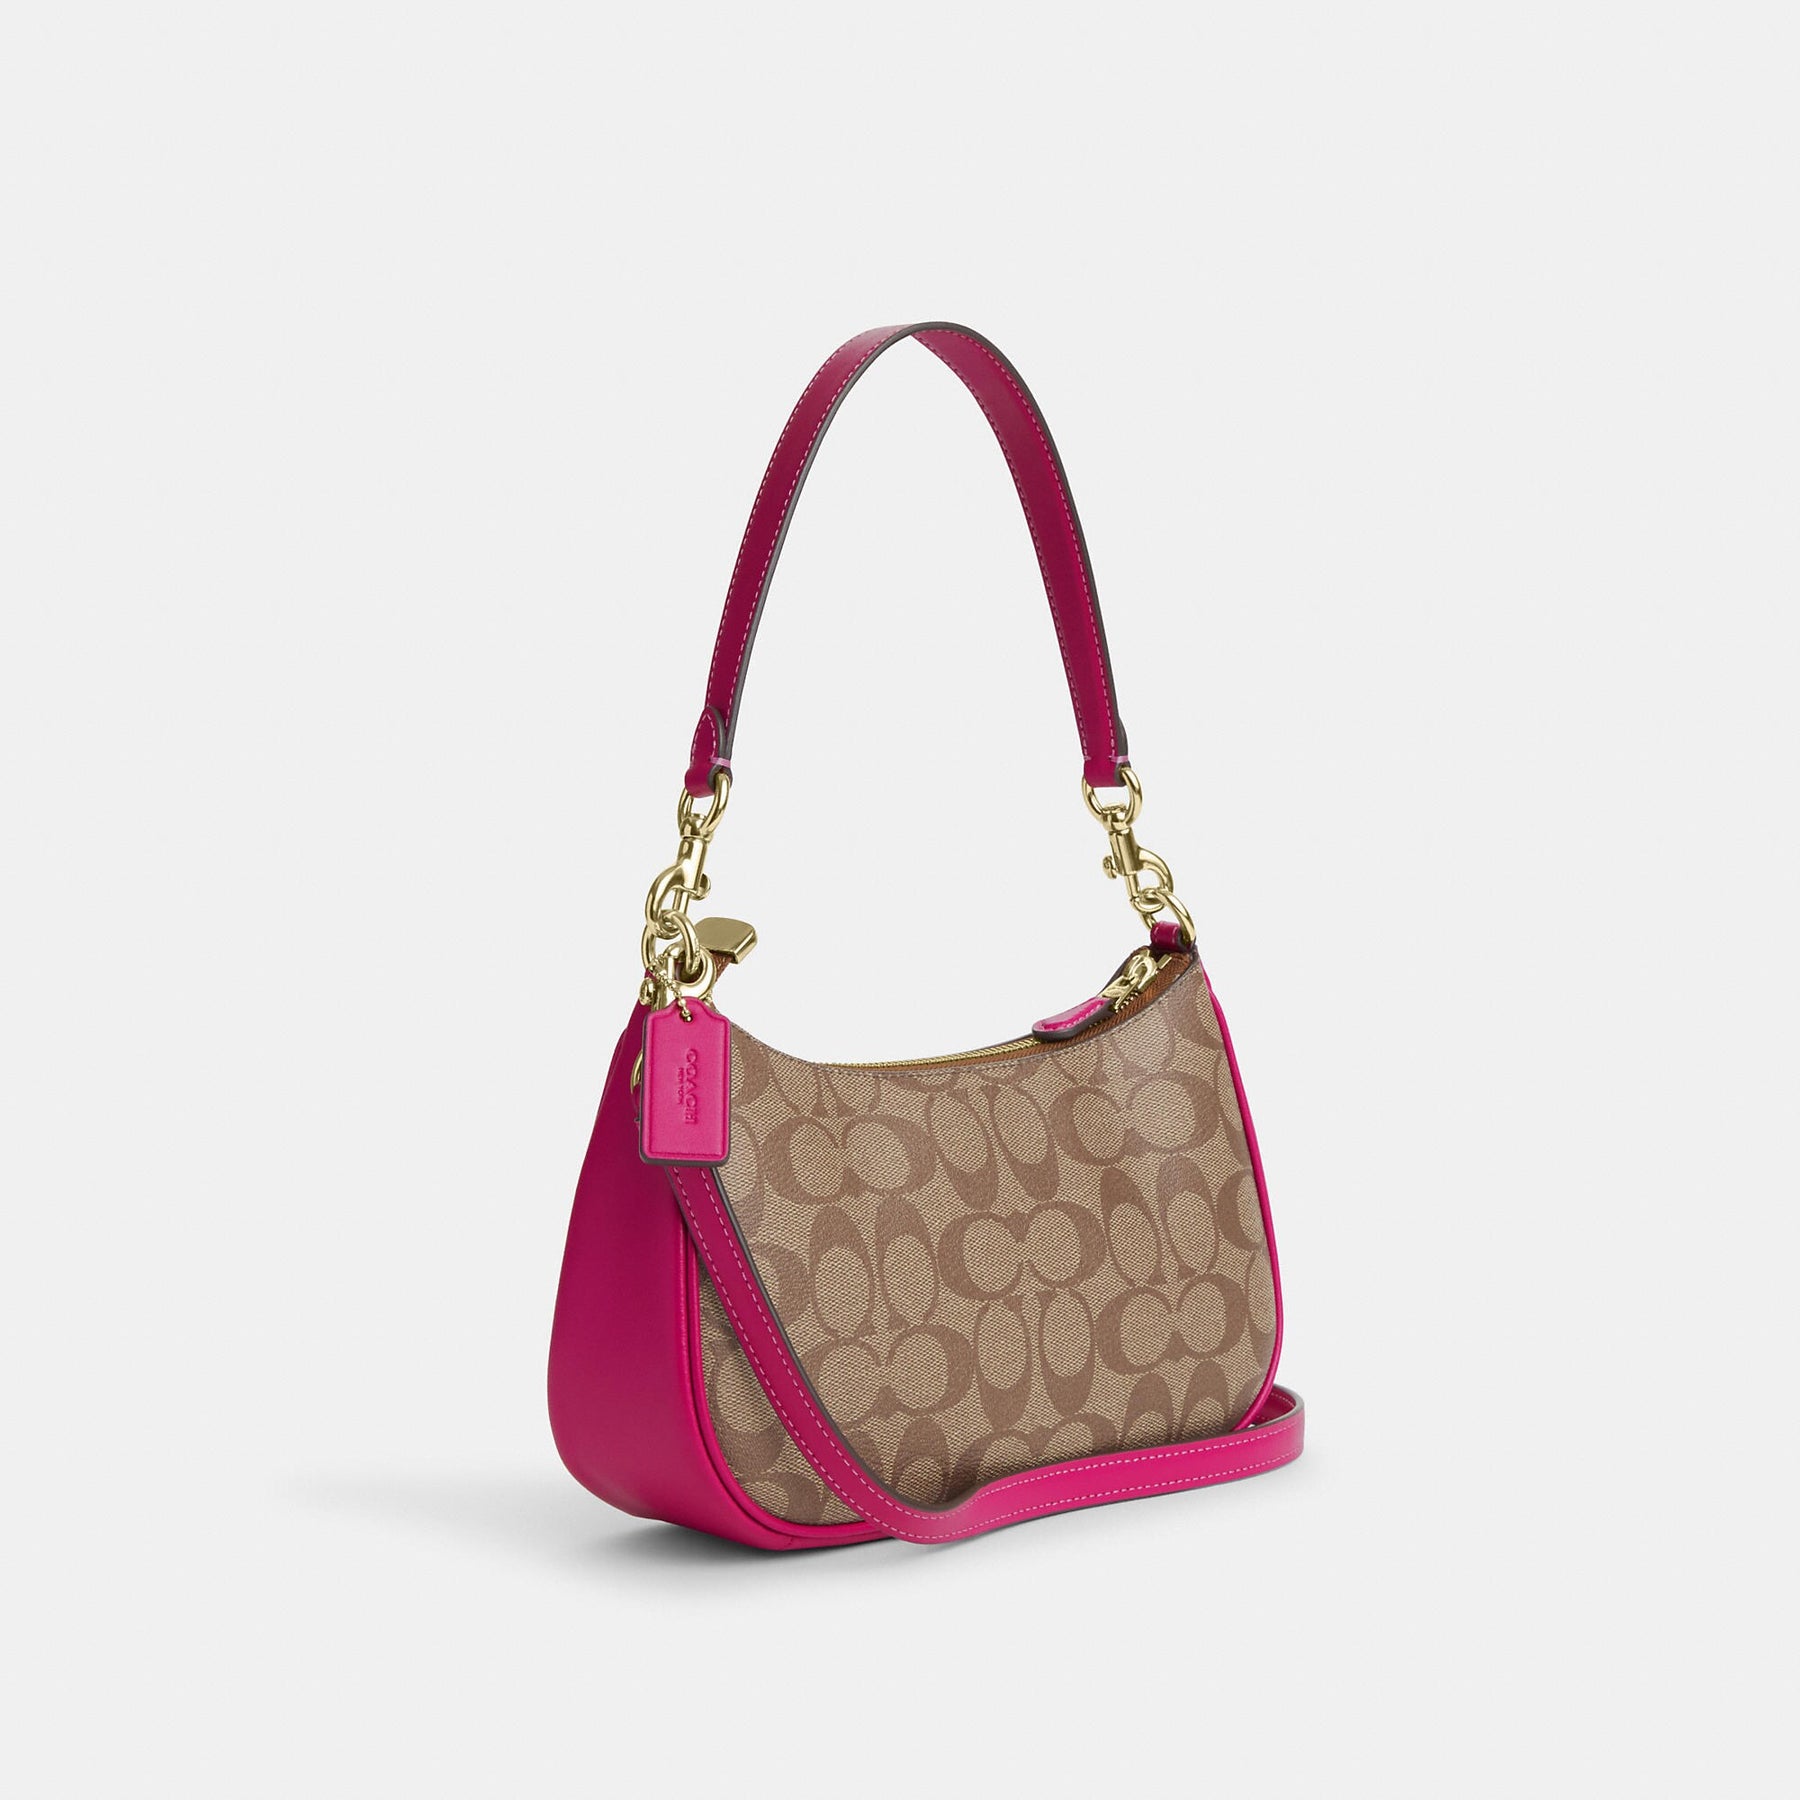 Coach Outlet has up to 75% off on handbags and shoes for